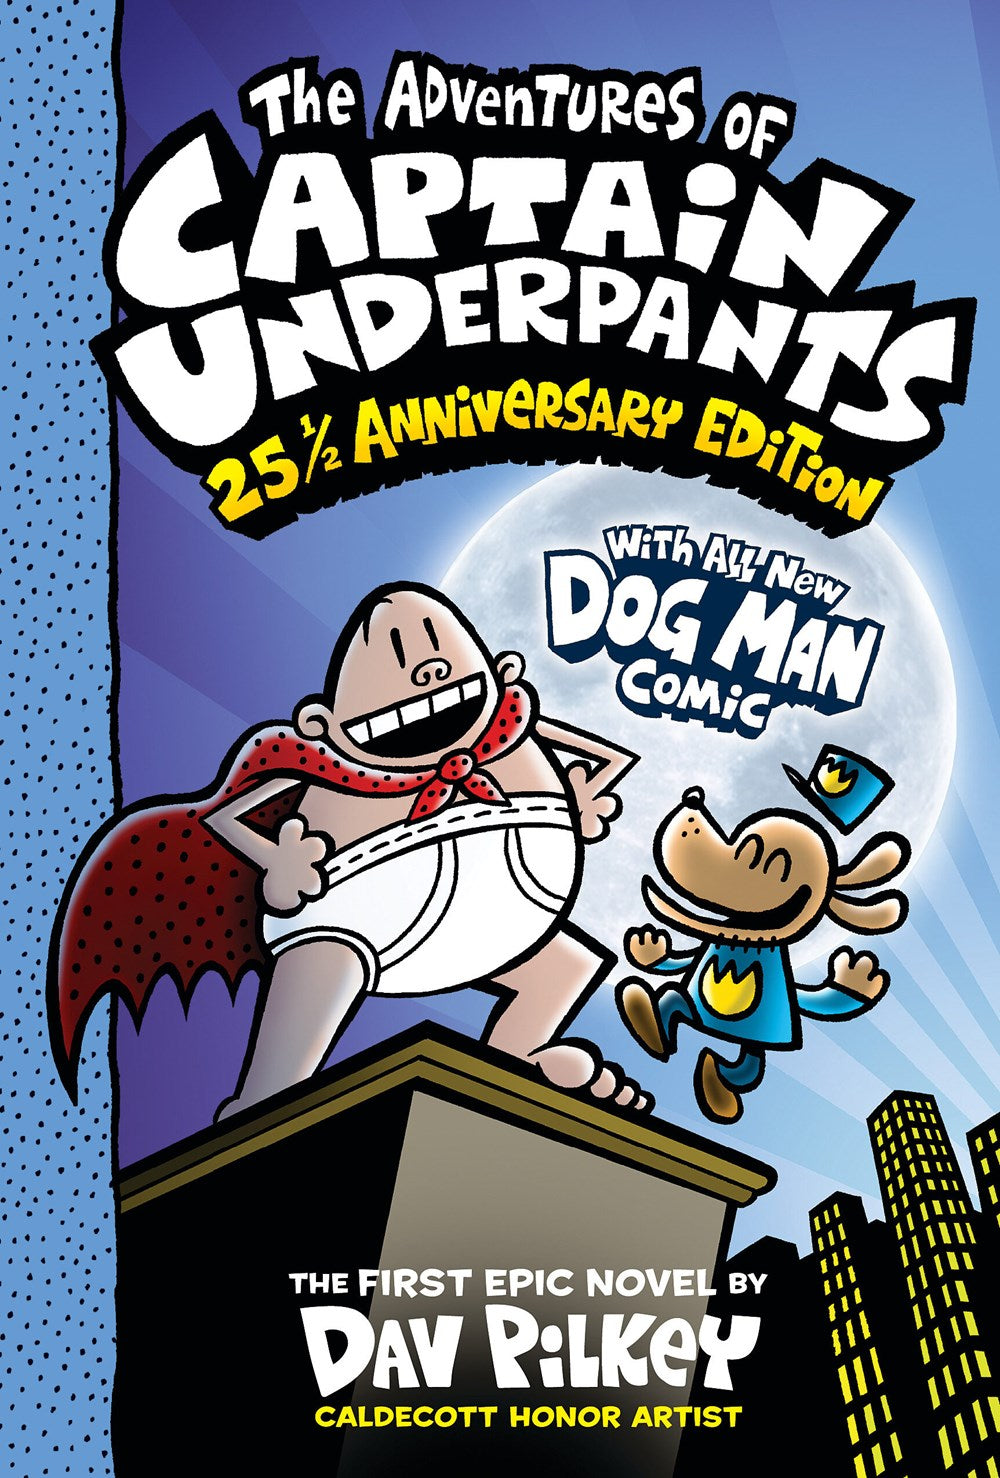 The Adventures of Captain Underpants (Book 1)